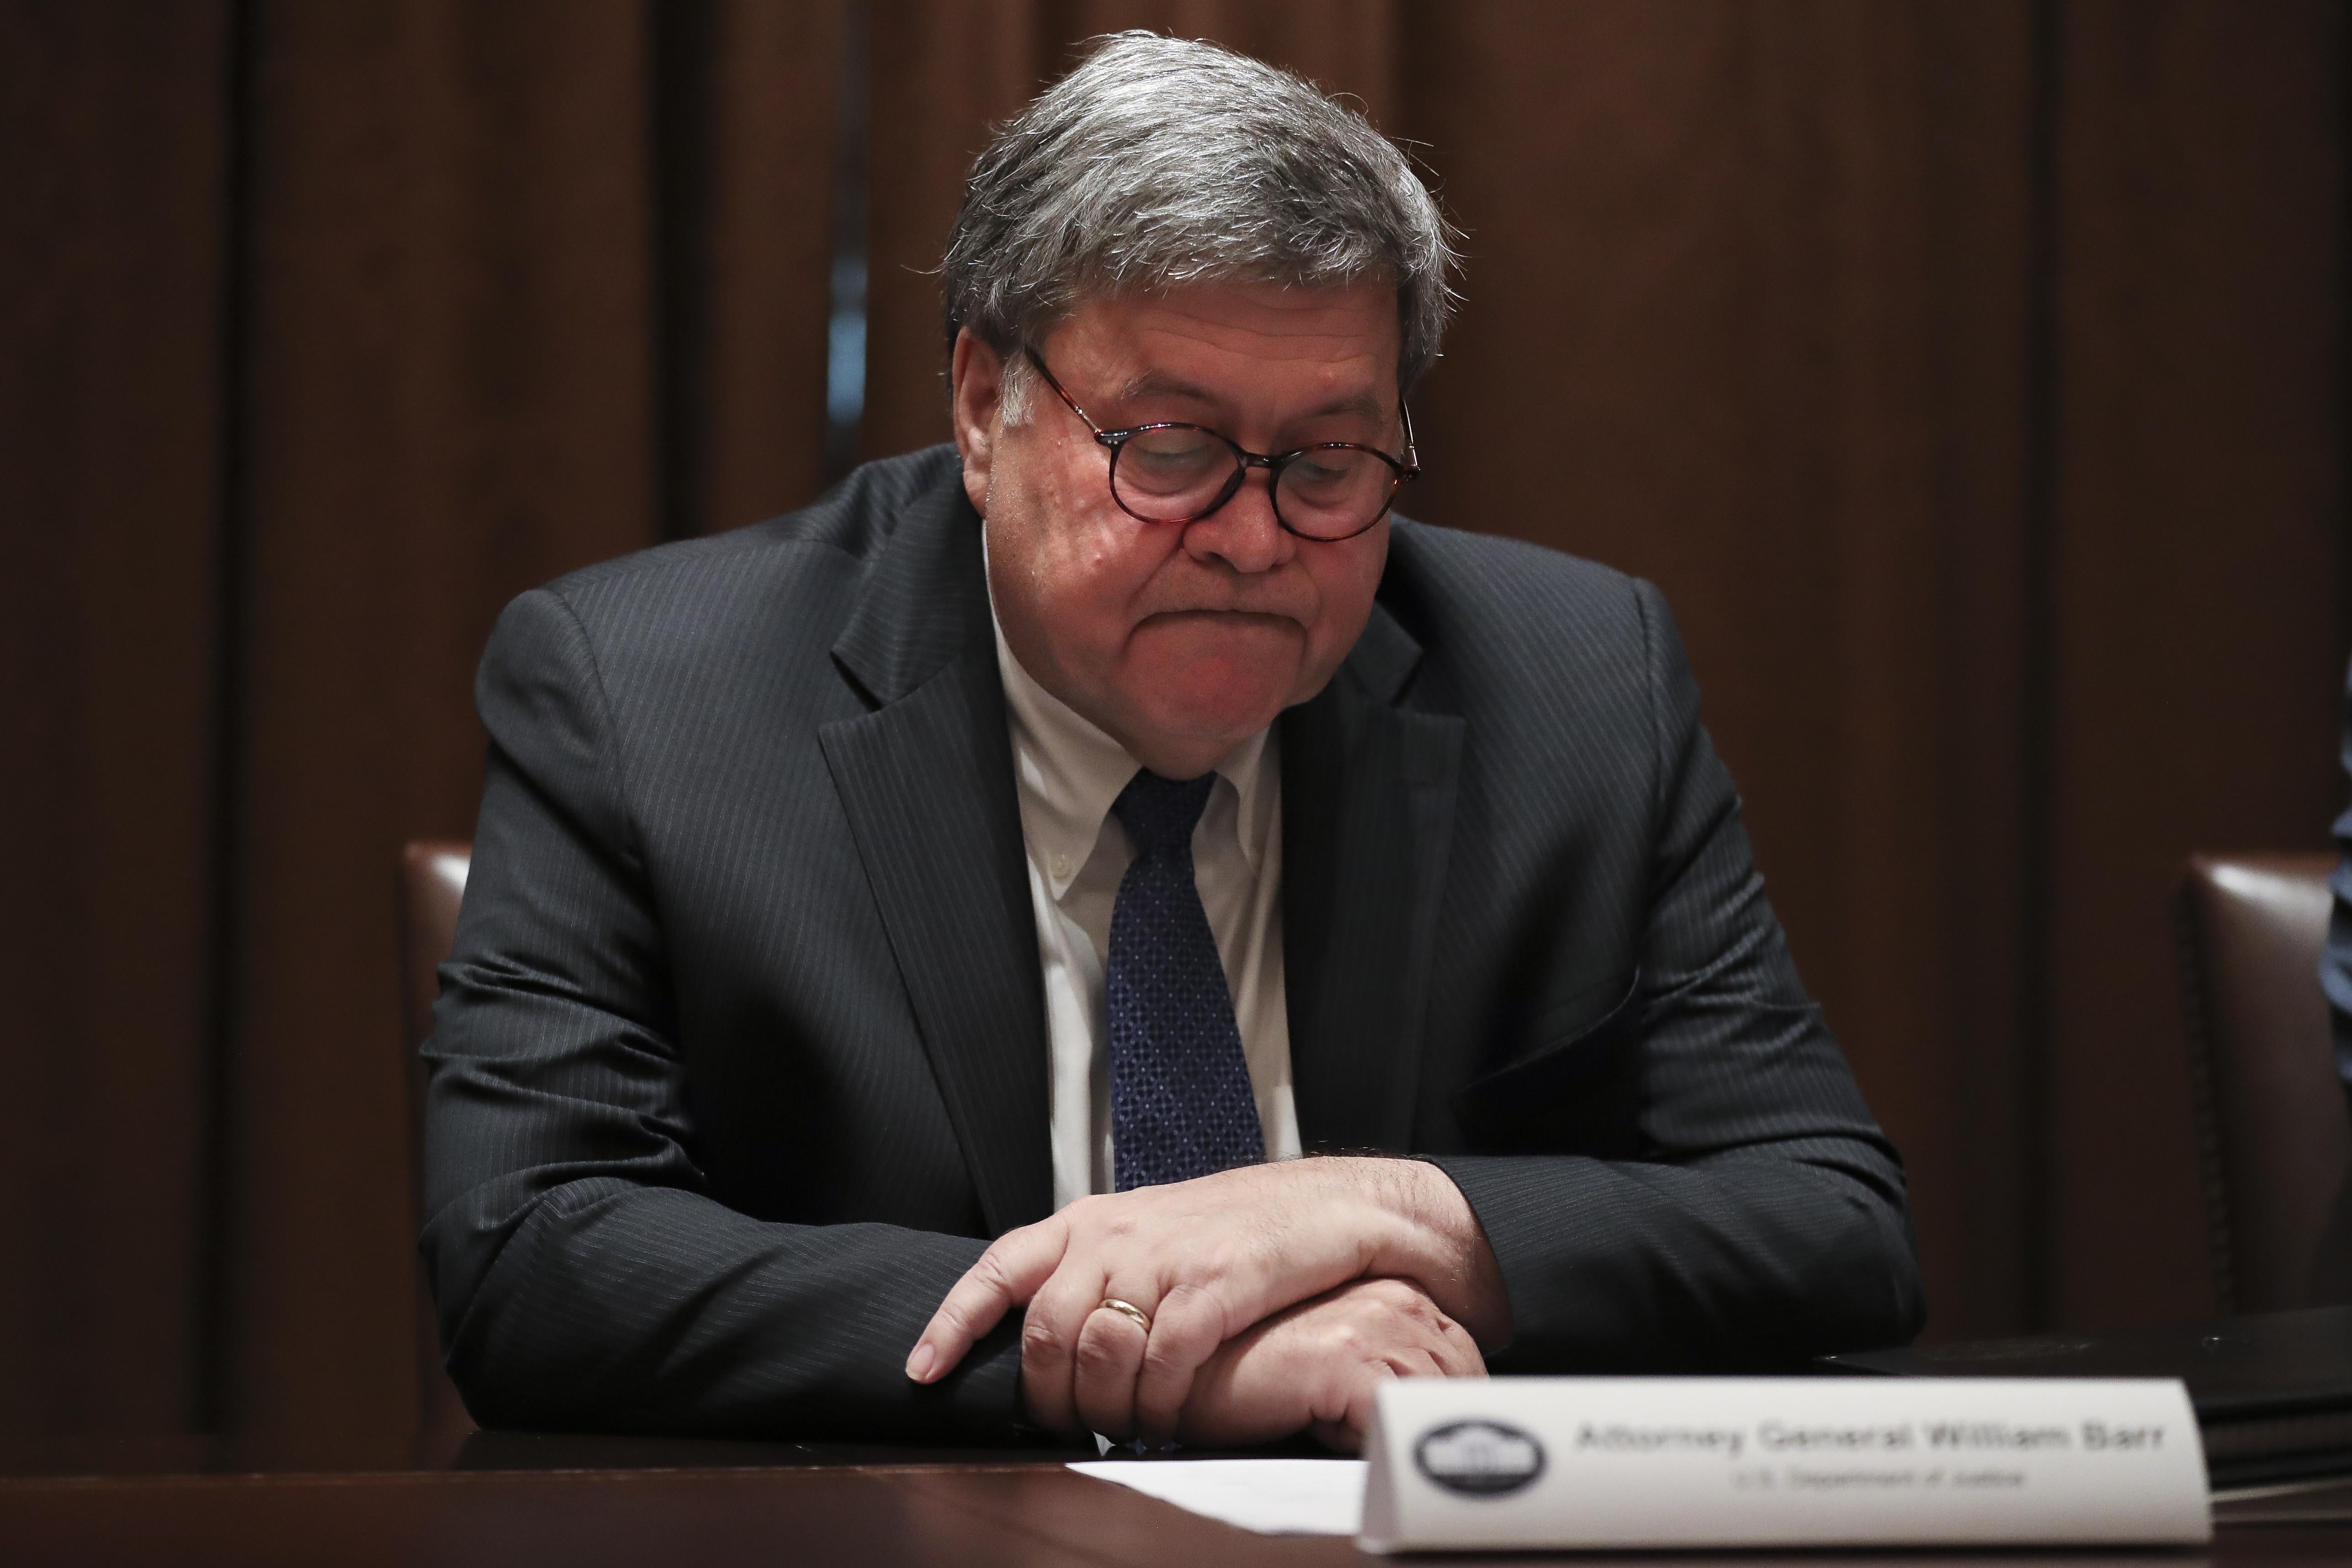 Attorney General William Barr looks down at a notepad while sitting at a table at the White House.